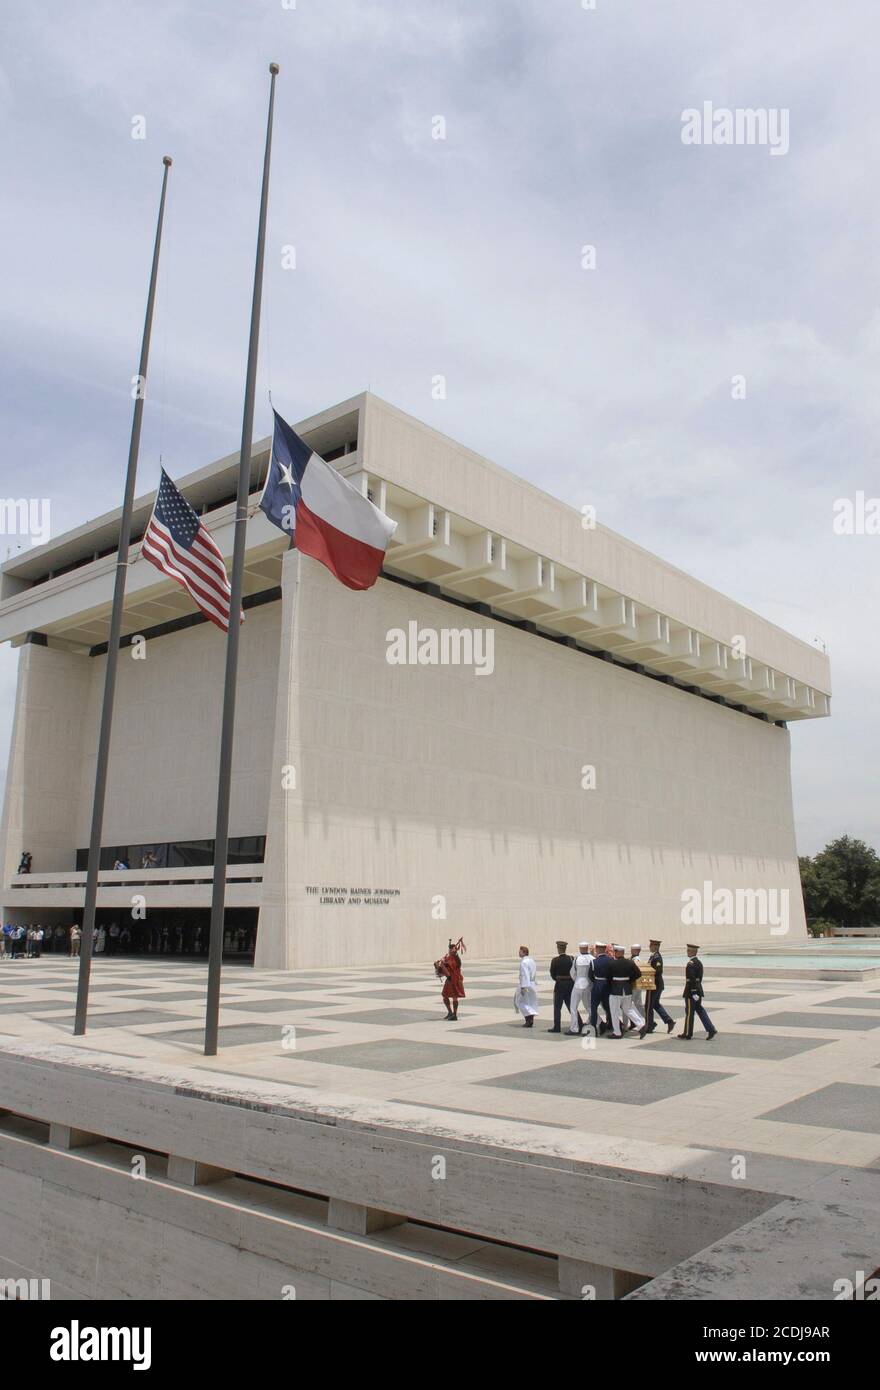 Austin, Texas USA, July 13, 2007: The casket of Lady Bird Johnson is carried across the plaza at the LBJ Library prior to her public viewing. ©Marjorie Cotera/Daemmrich Photography Stock Photo